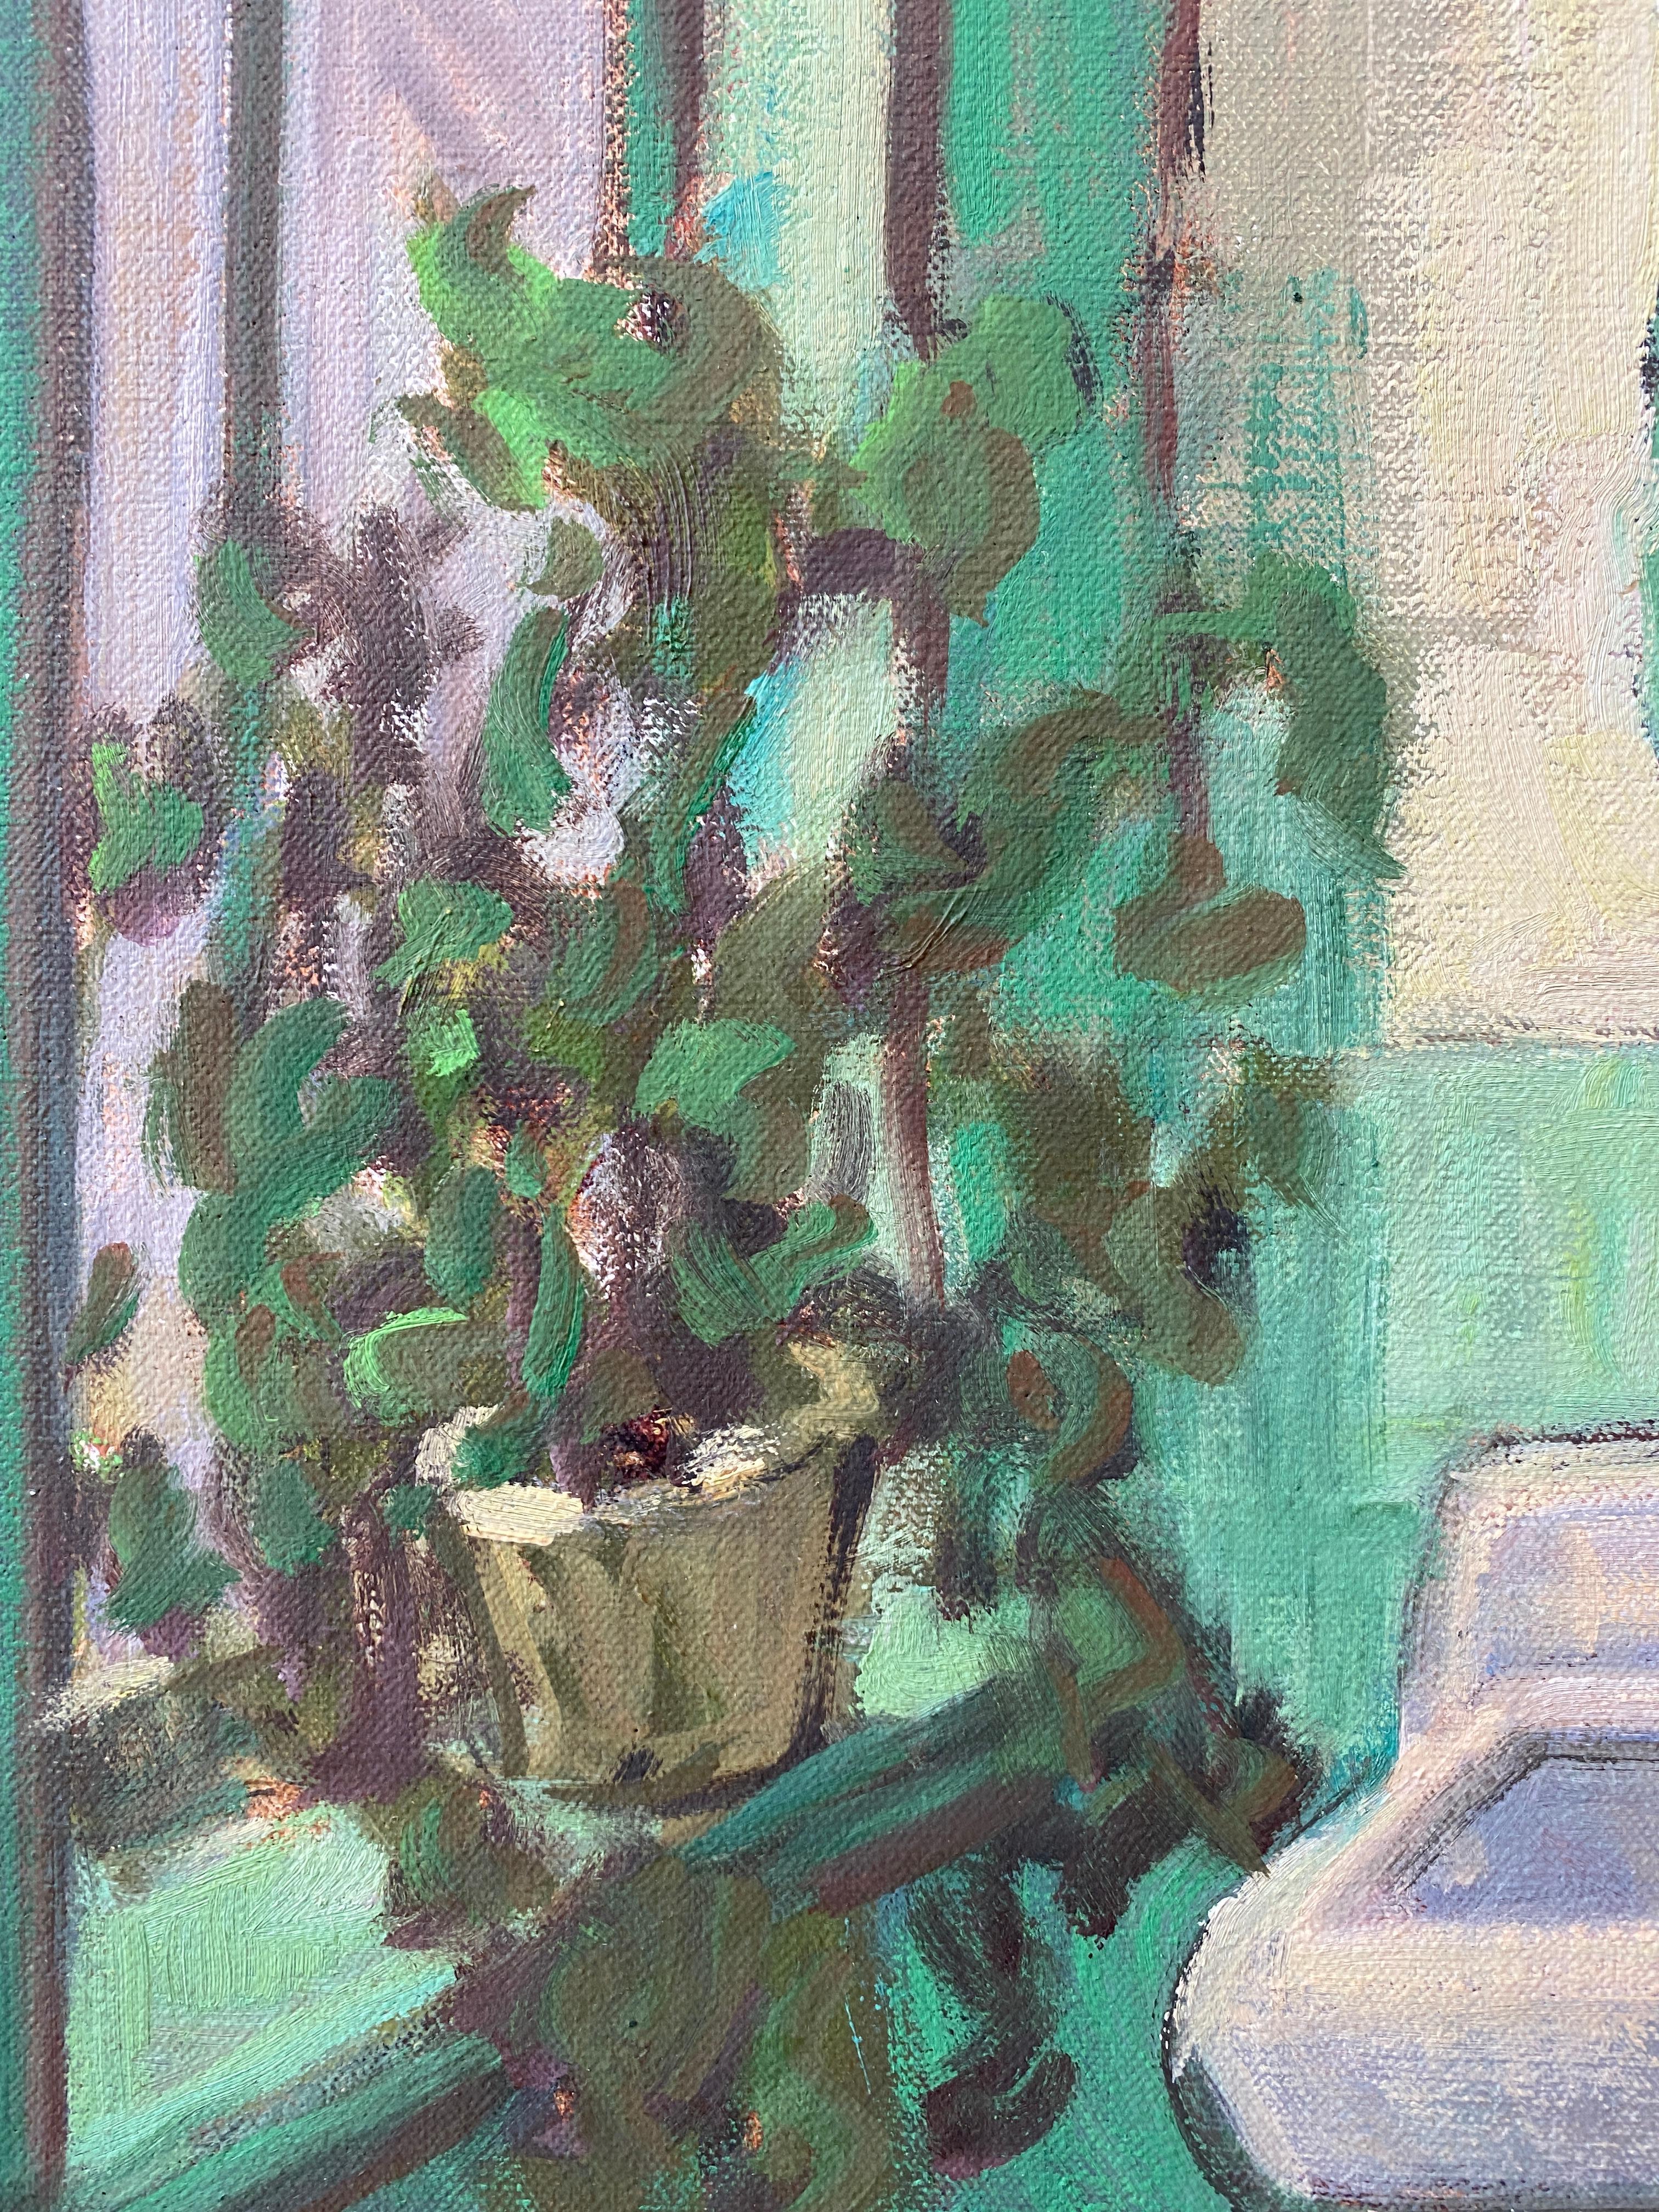 Hallway in Green - American Impressionist Painting by Tim McGuire